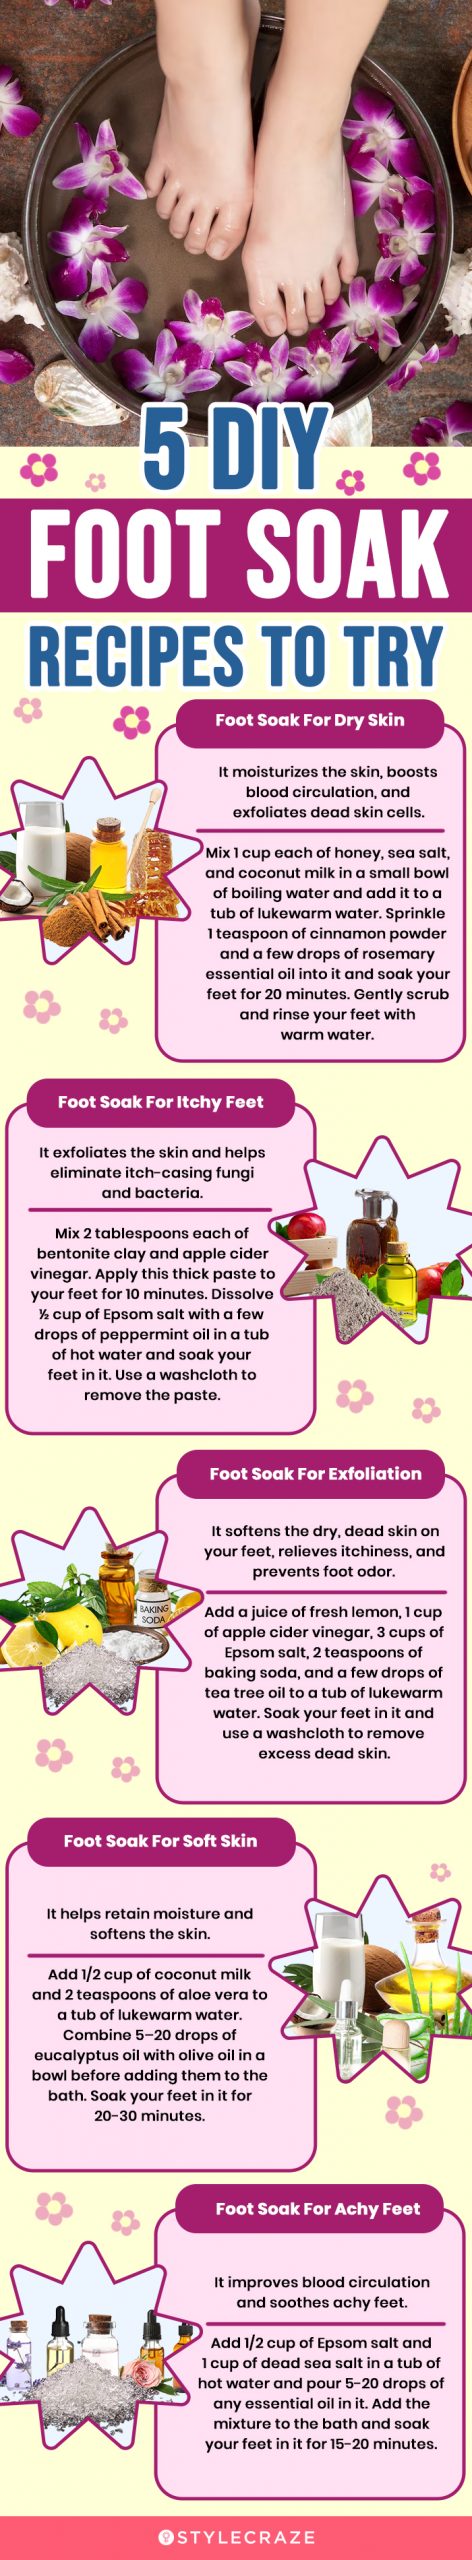 5 diy foot soak recipes to try (infographic)